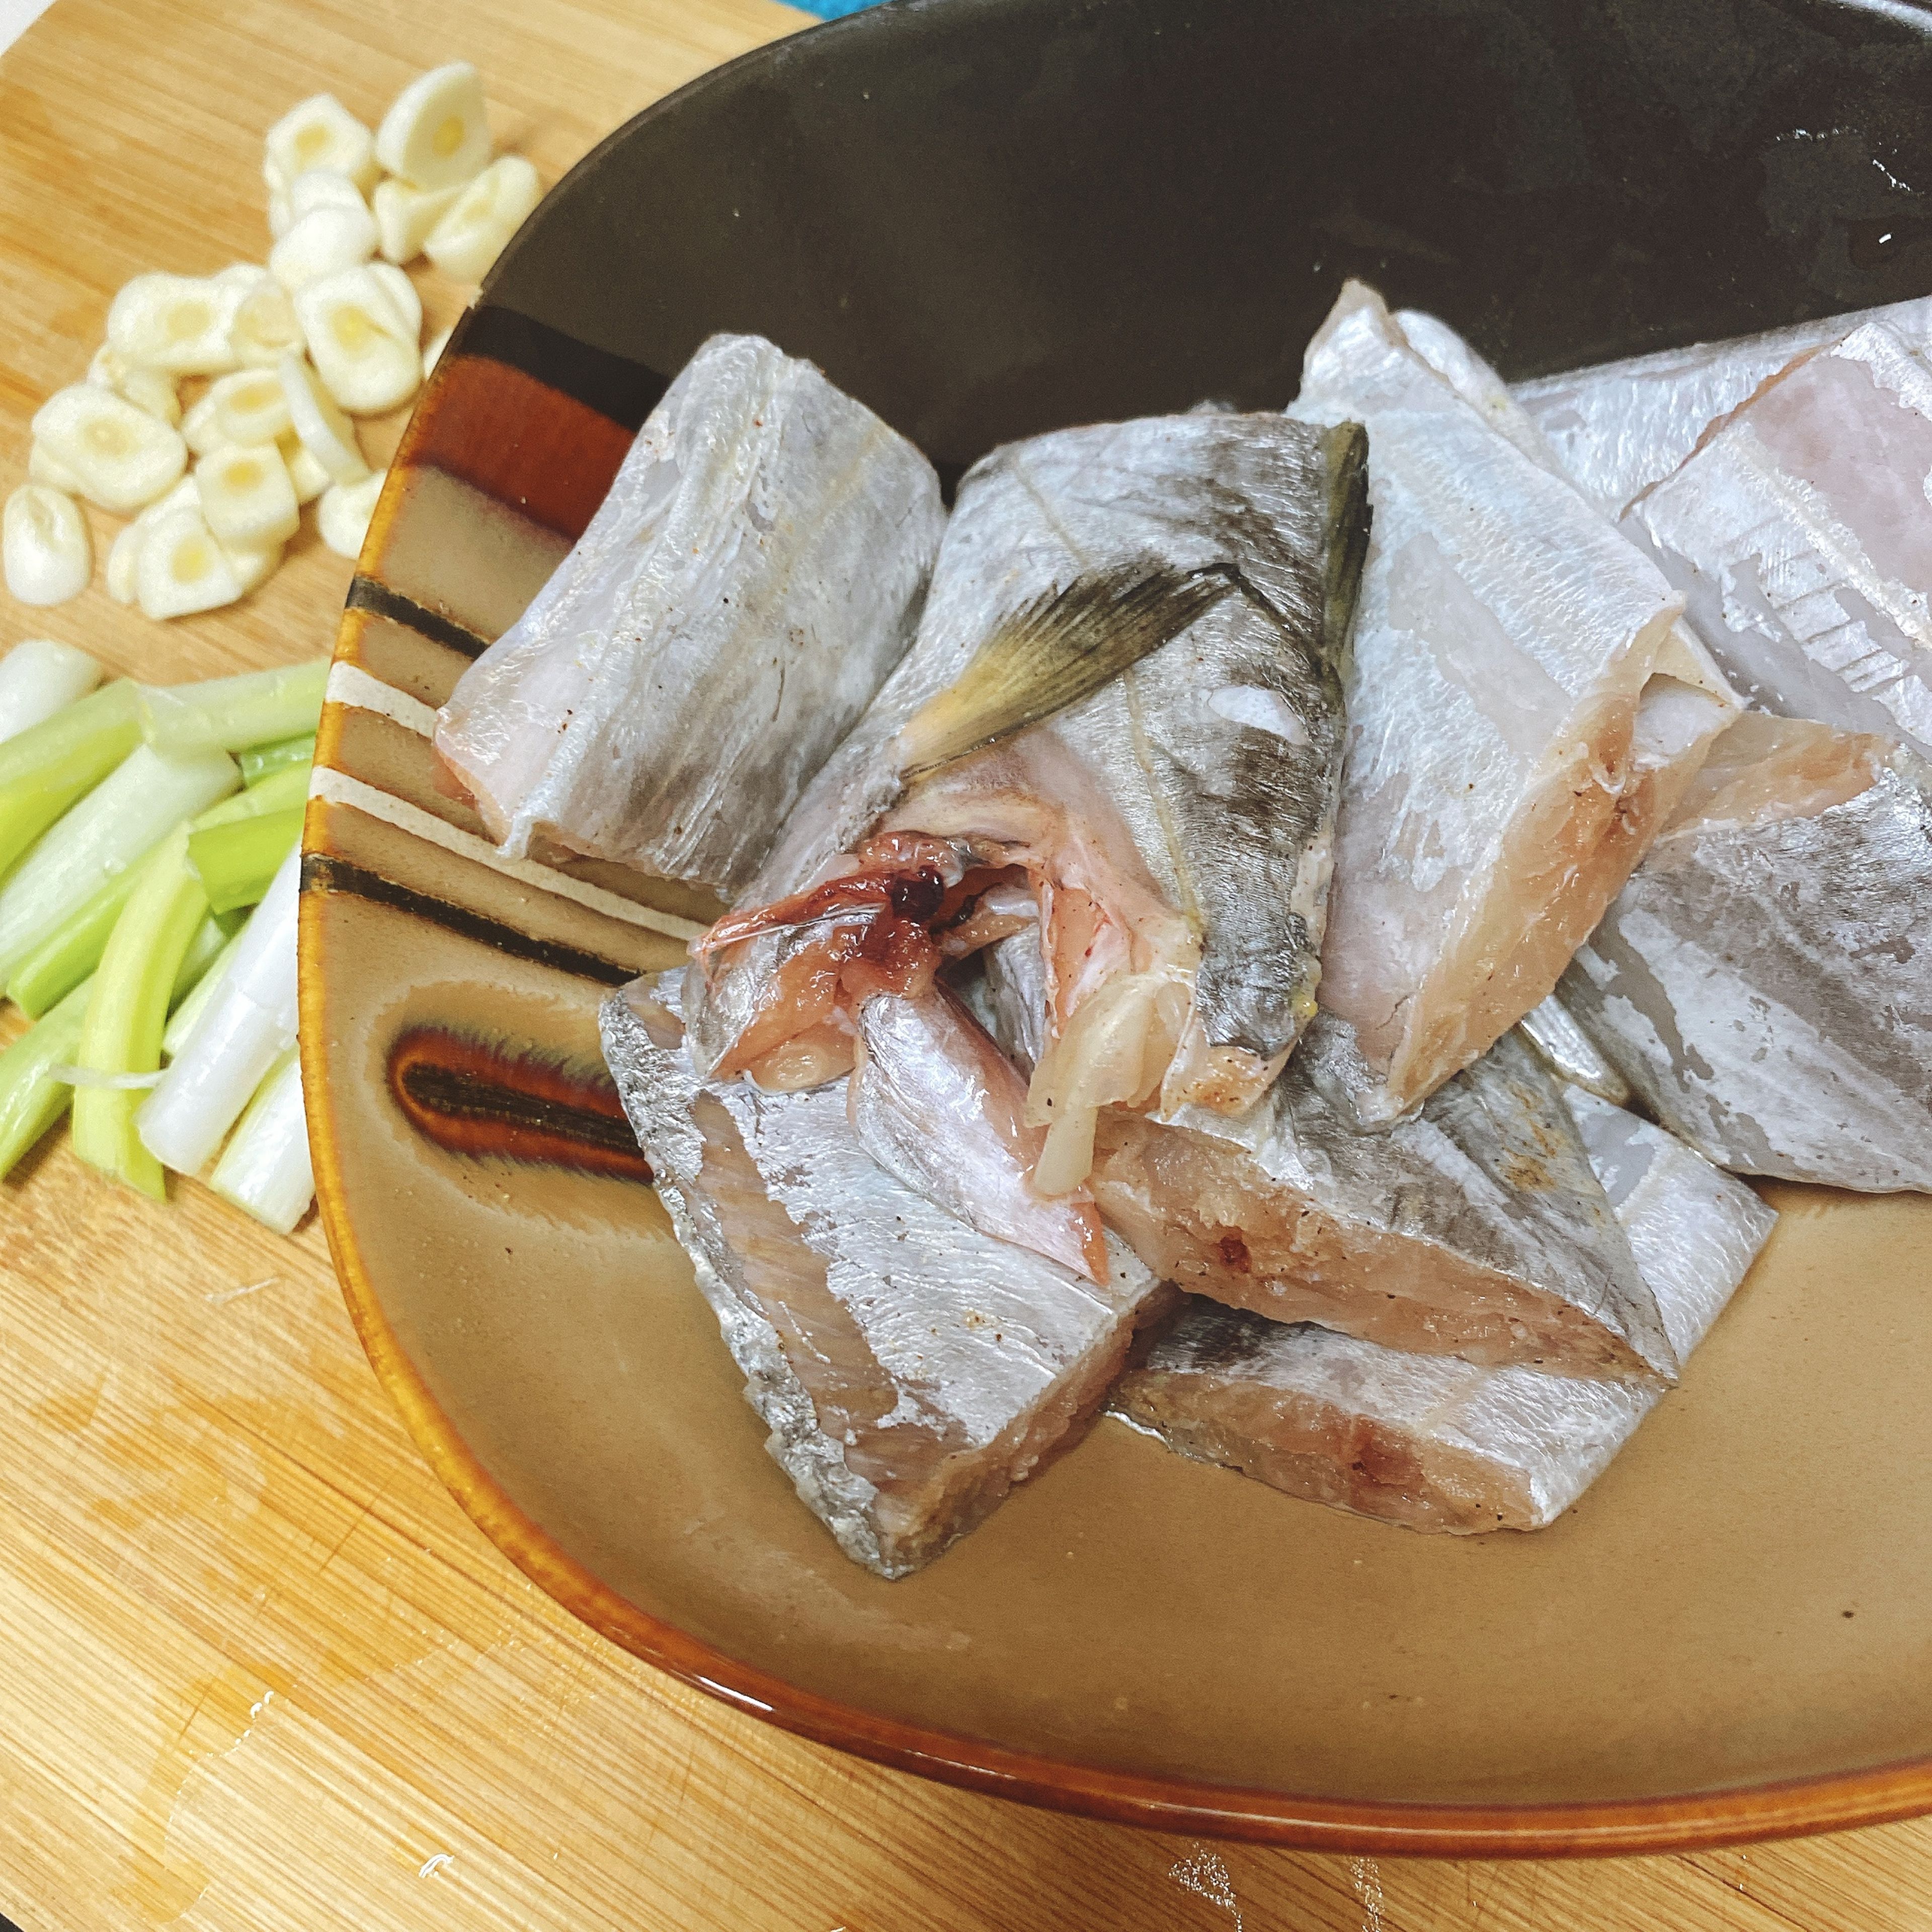 Add the ground white pepper and cooking wine to the gutted fish. While it’s sitting, slice the garlic and chop the scallions